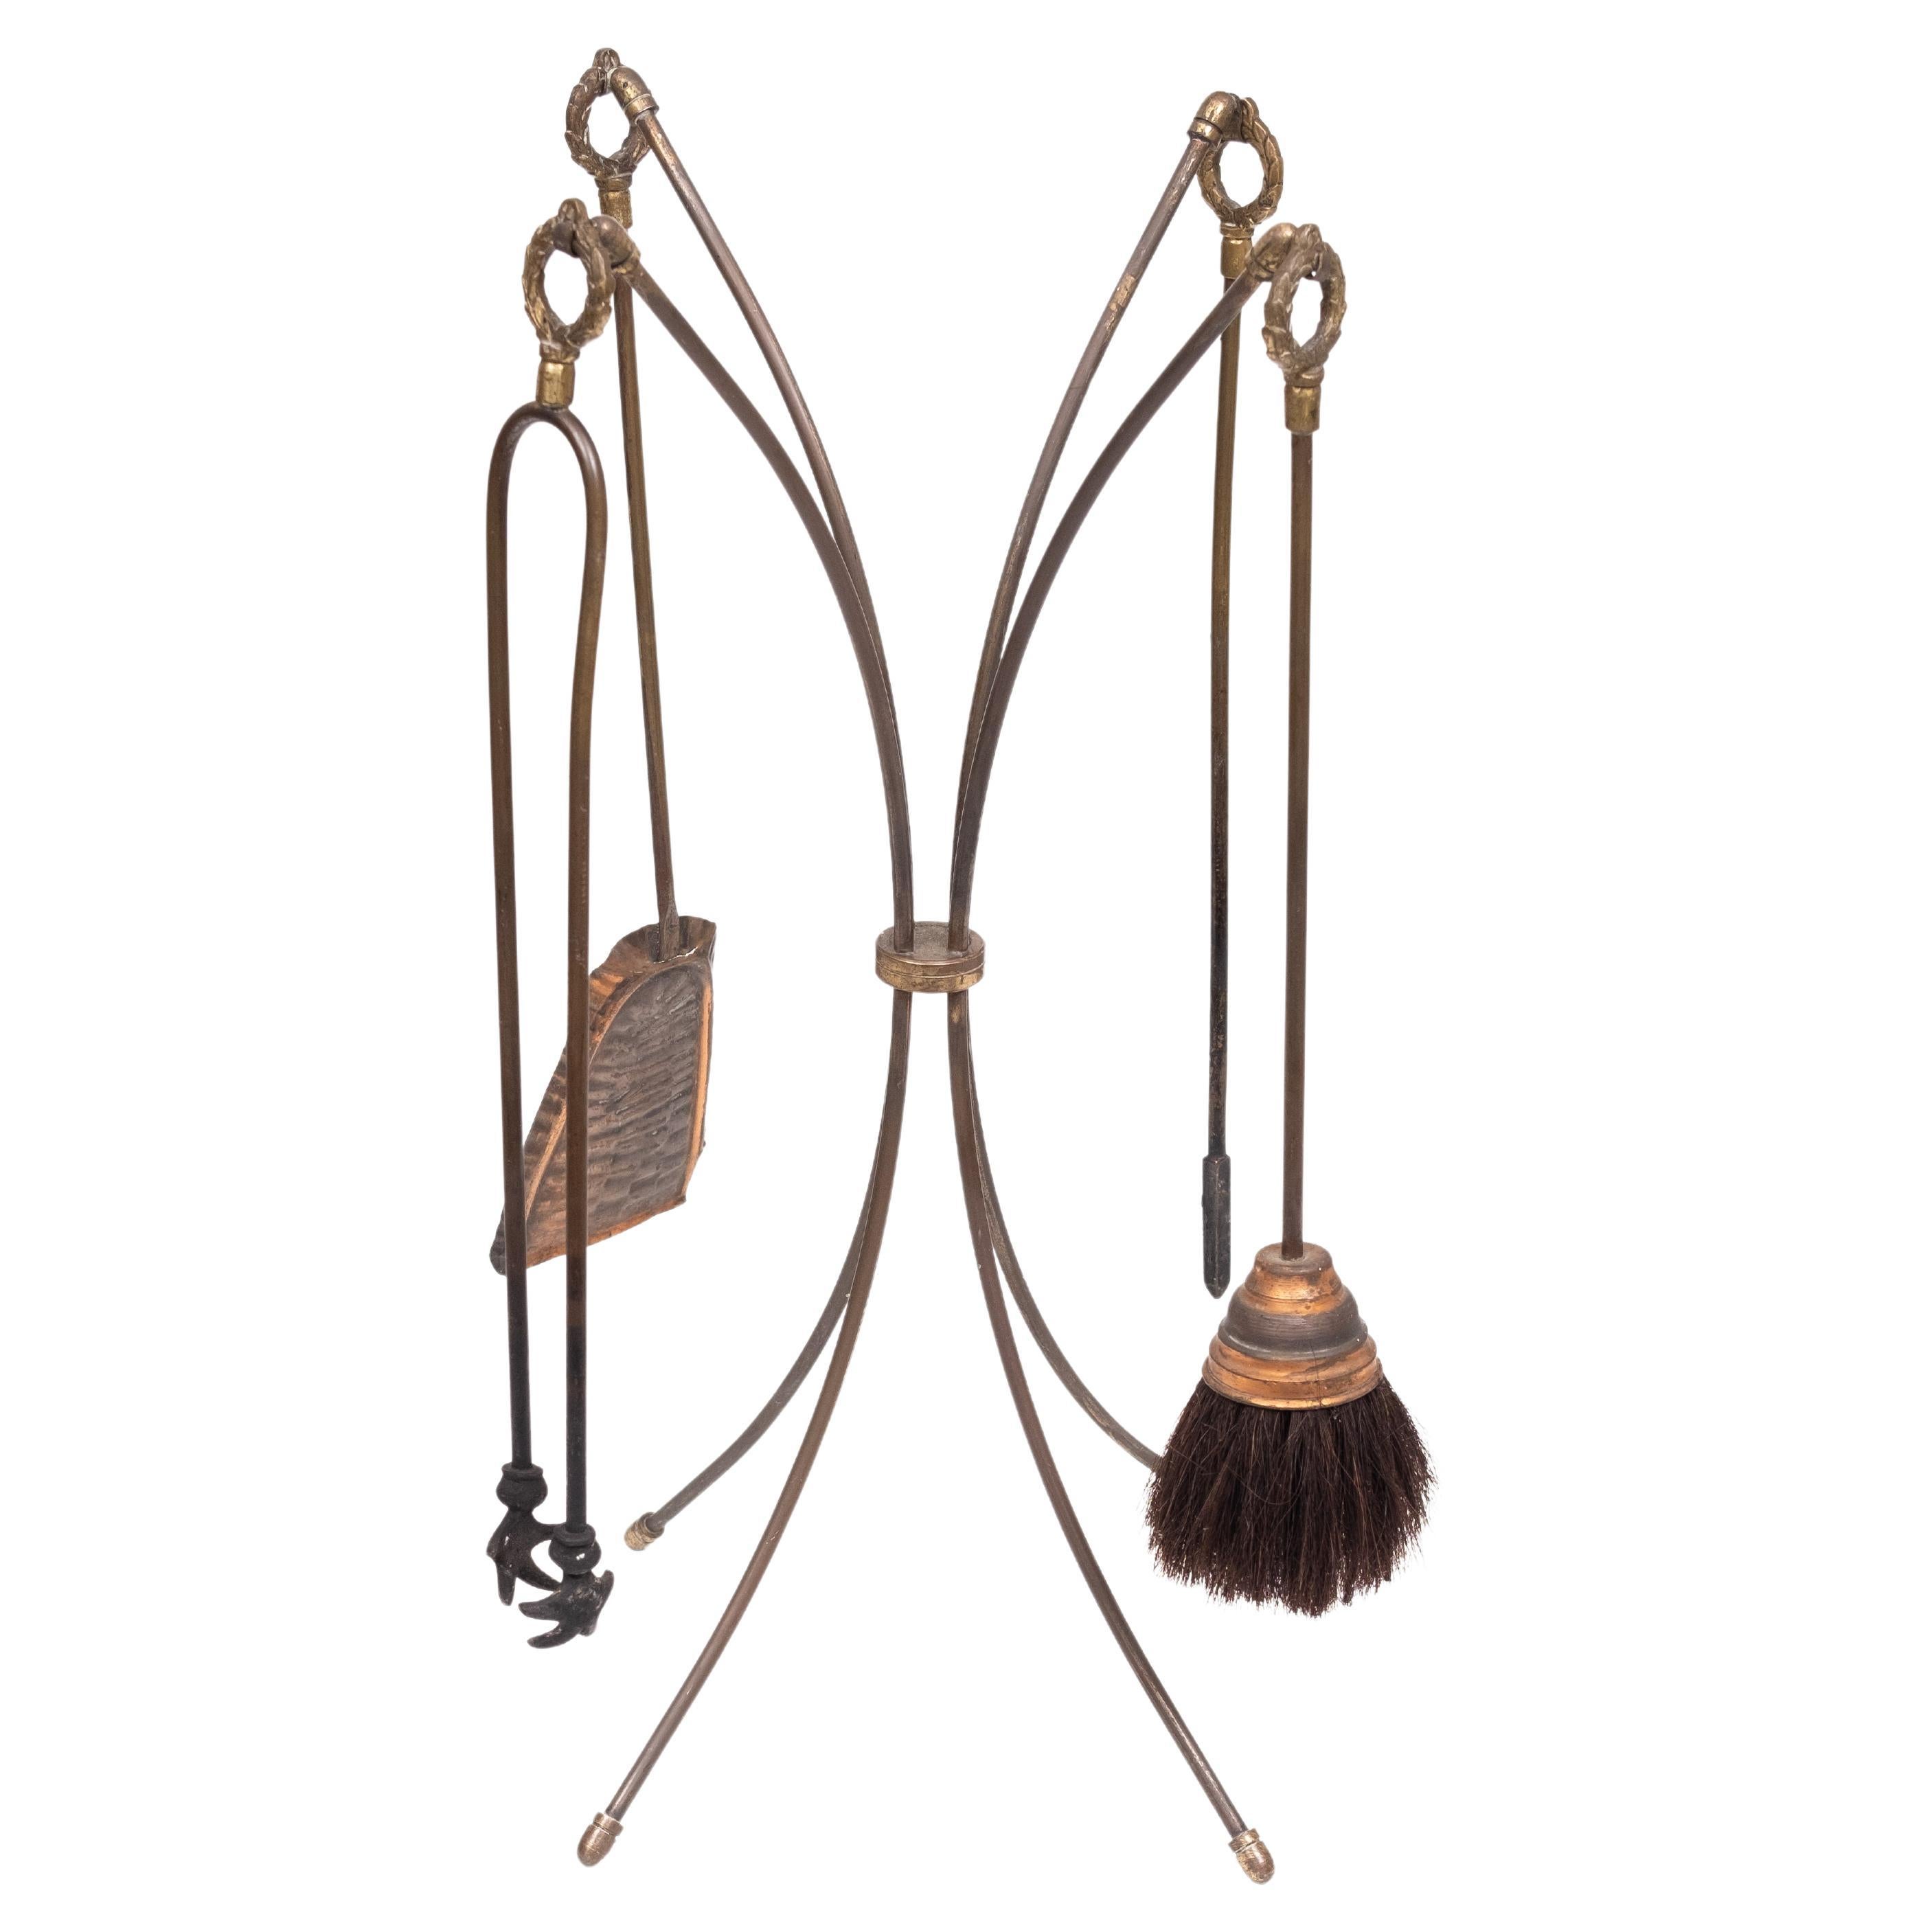 Empire Revival Fireplace Tools and Chimney Pots